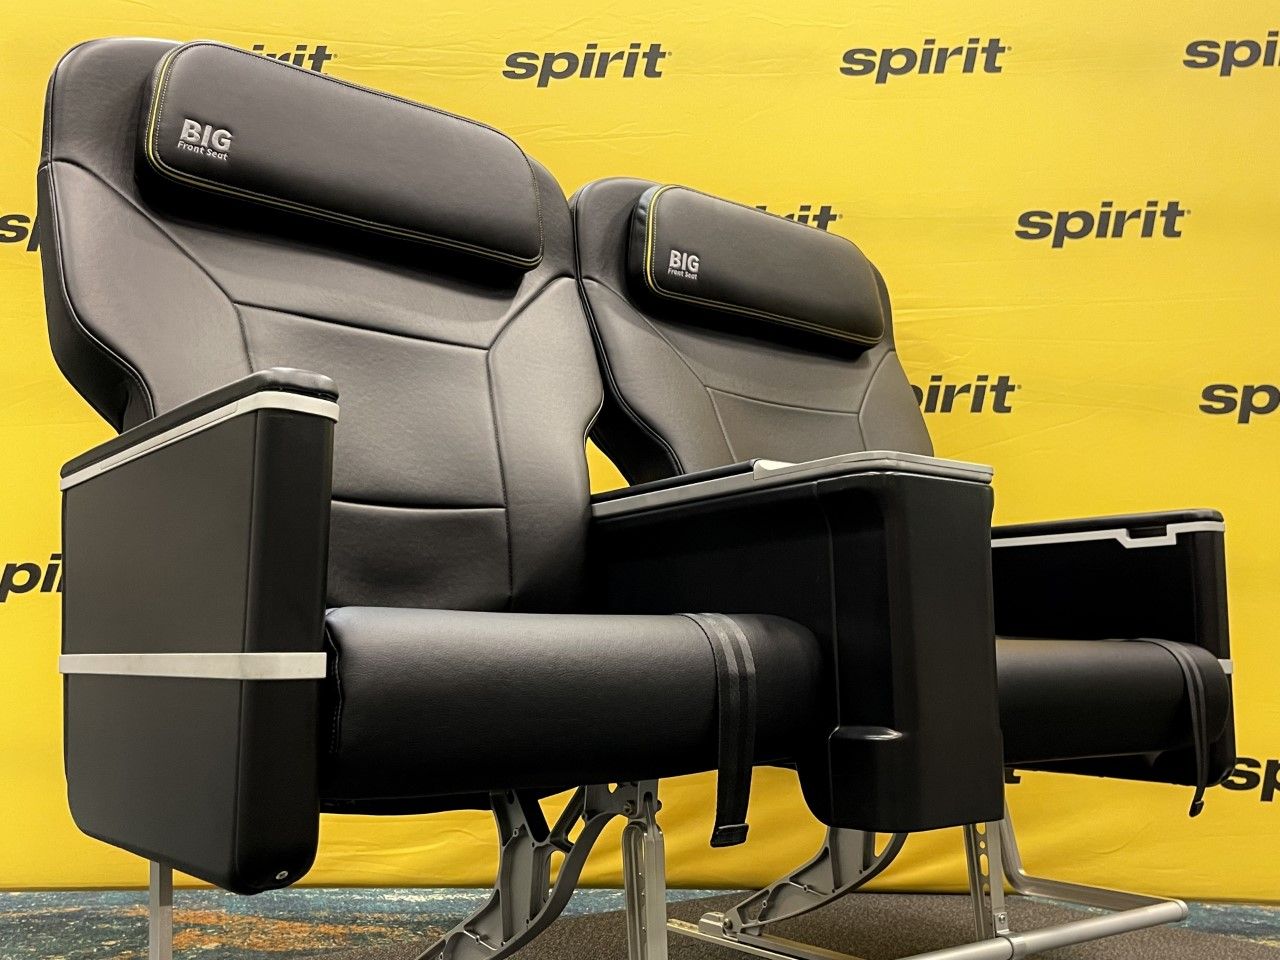 HAECO Cabin Solutions provides Spirit Airlines with Vector Seating for A320neo Family aircraft_2.jpg